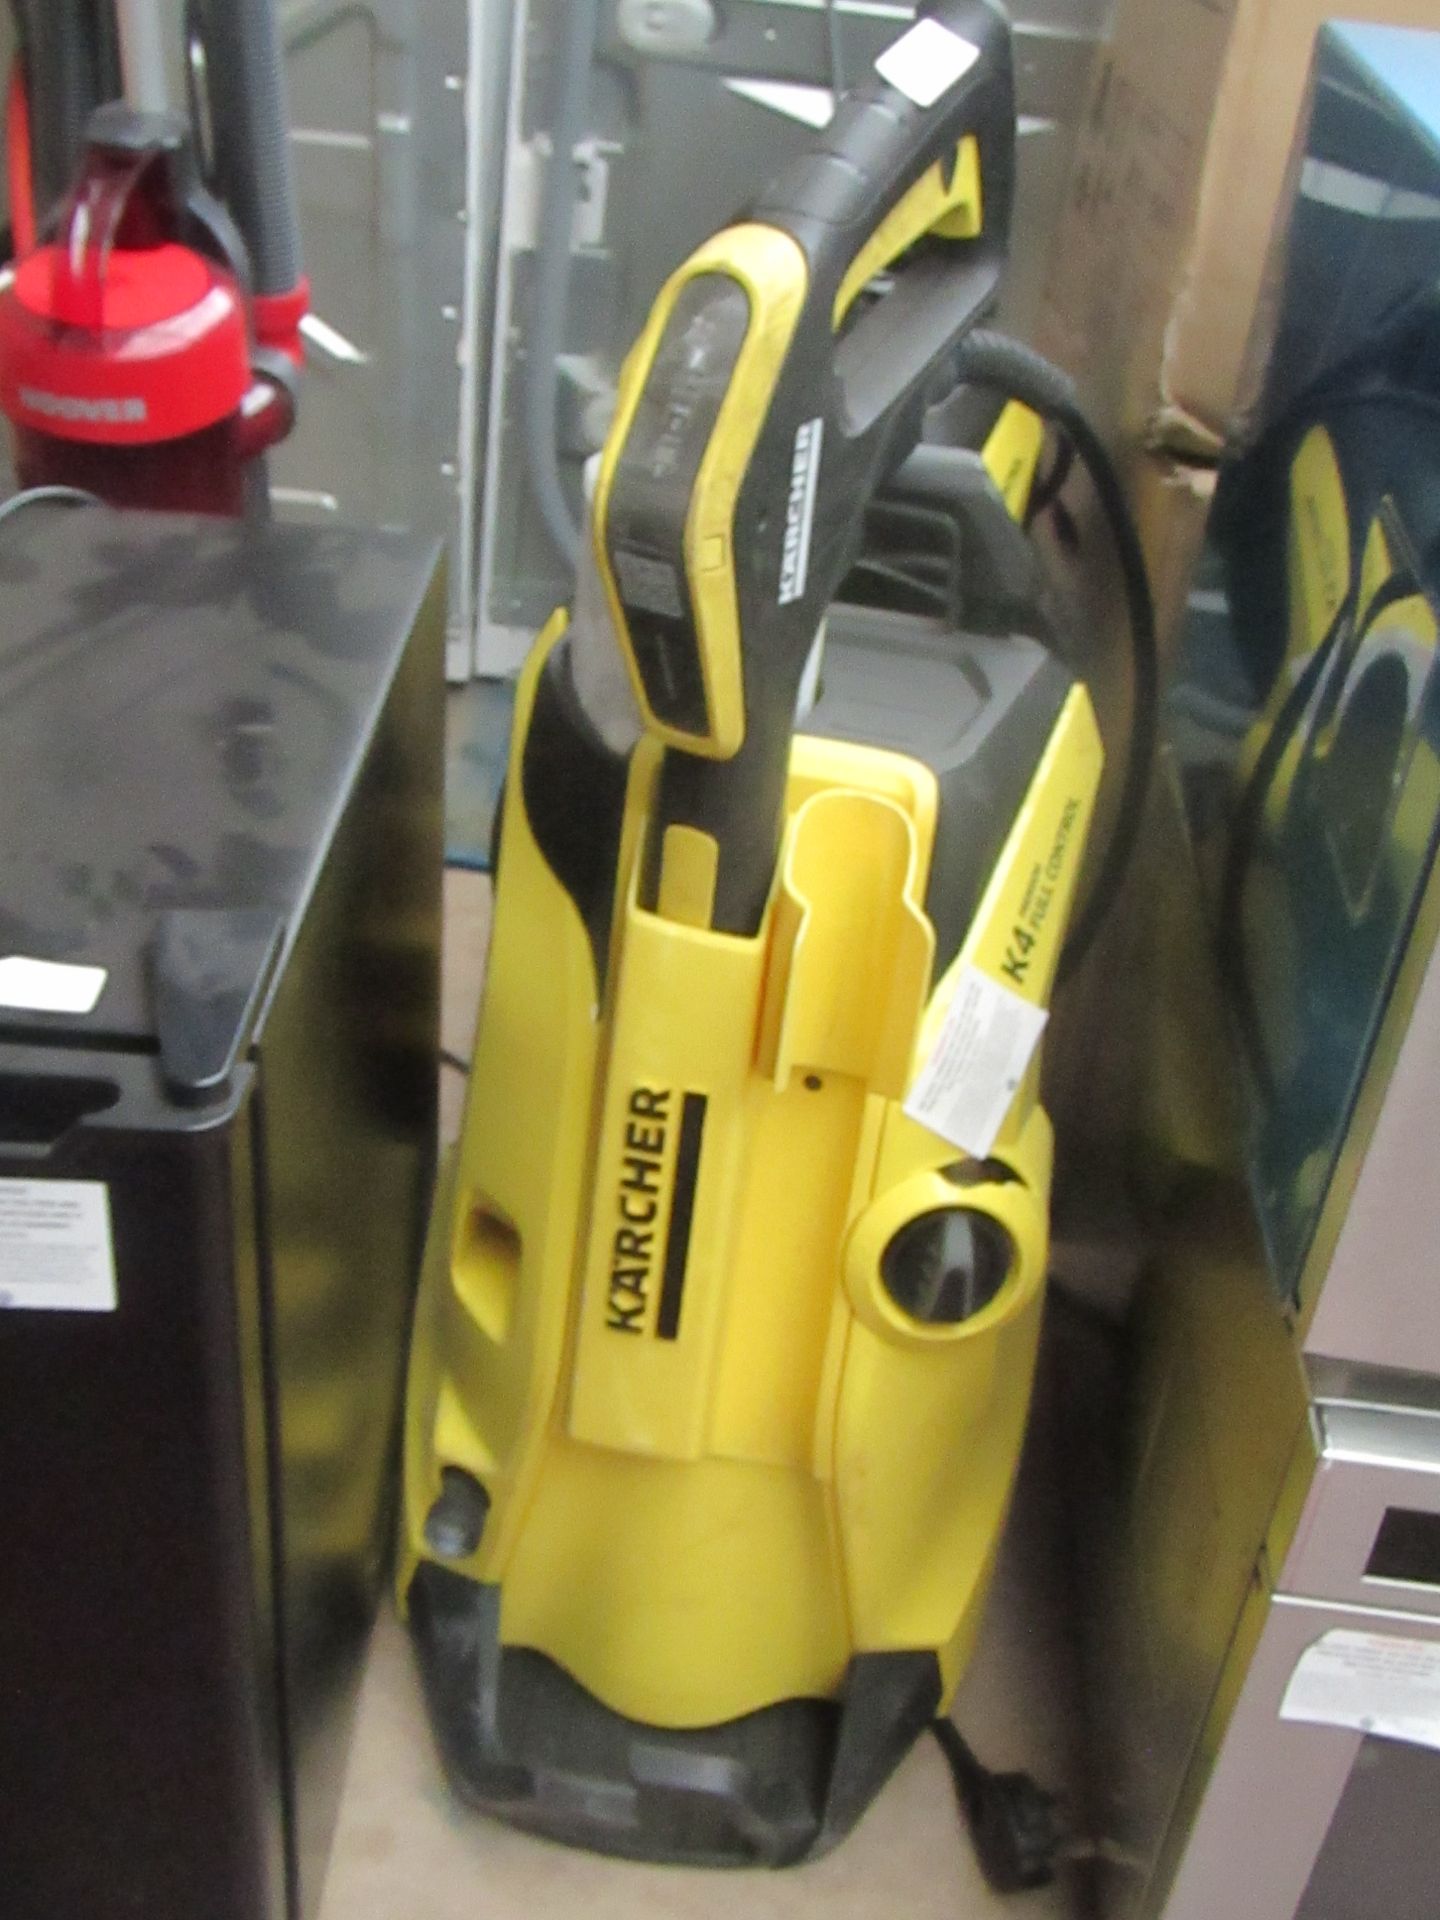 Karcher K4 Full Control Premium pressure washer, powers on. Accessories included: Soap extension